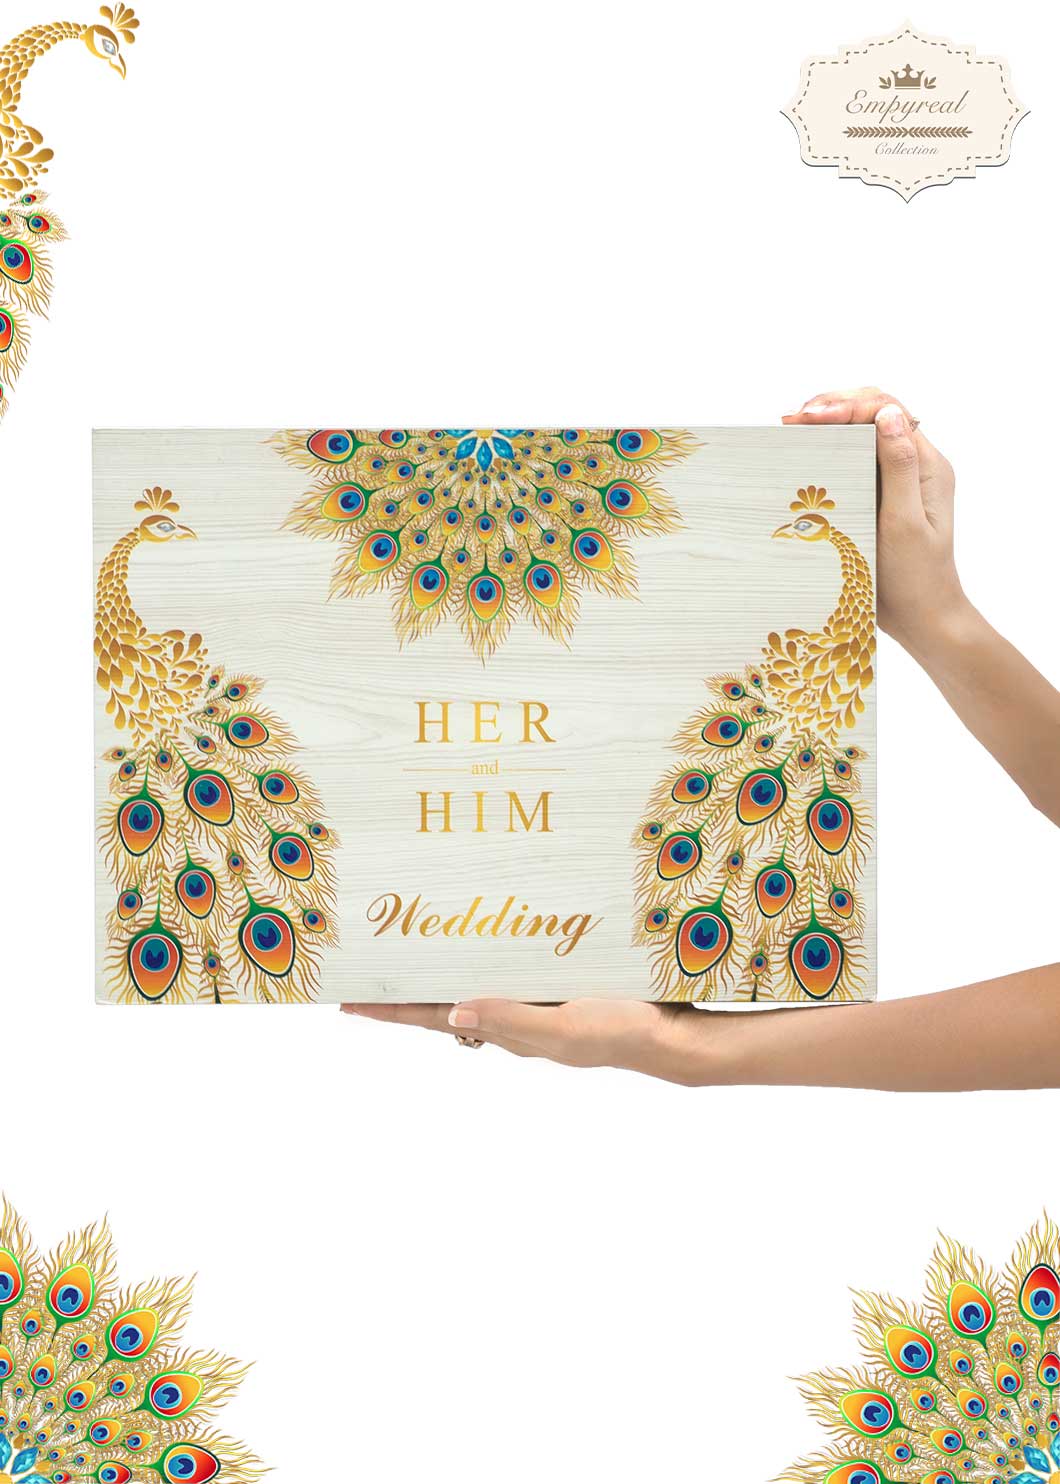 Customized Print On Wooden Box | Remembrance Box Wedding Personalized | Wedding gift for married couple Couples witnesses | Bidhbox